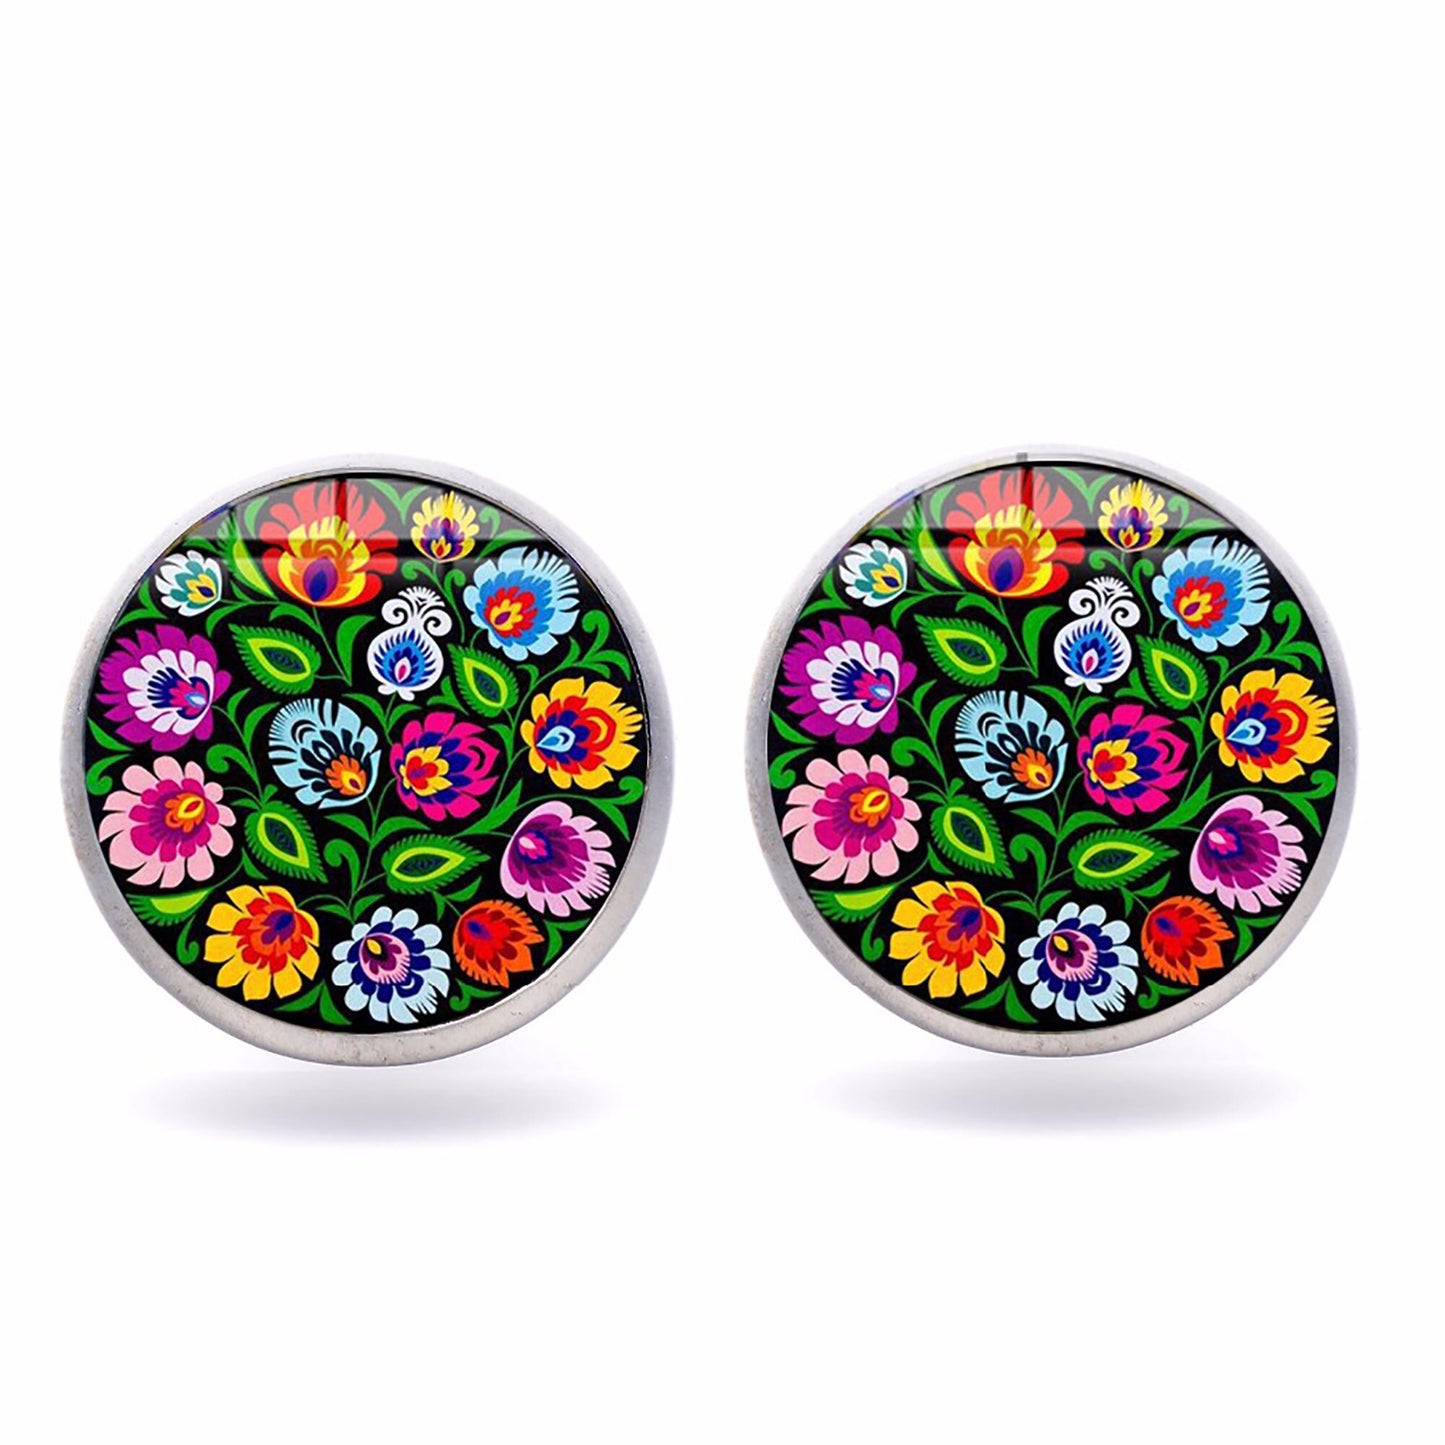 Silver Floral Stud Cabochon Earrings Colorful Mexican FolkArt Jewelry Style Women Spring Fashion Aretes Florales Arte Popular Mexicano Mujer